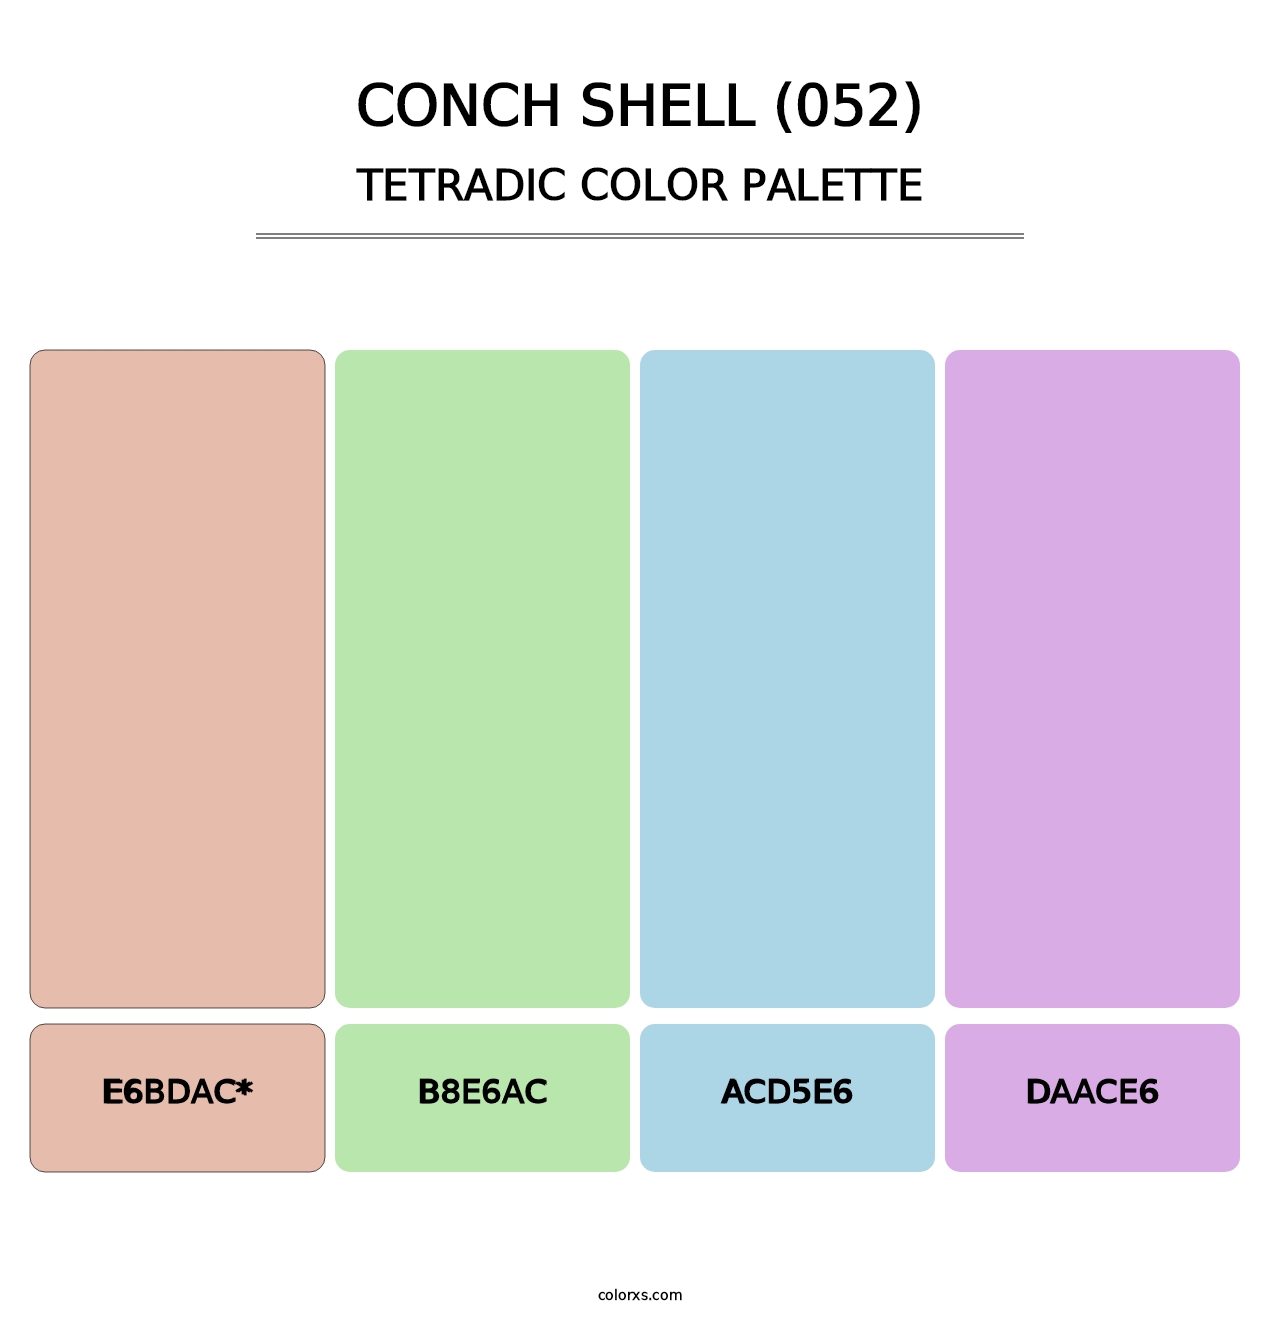 Conch Shell (052) - Tetradic Color Palette